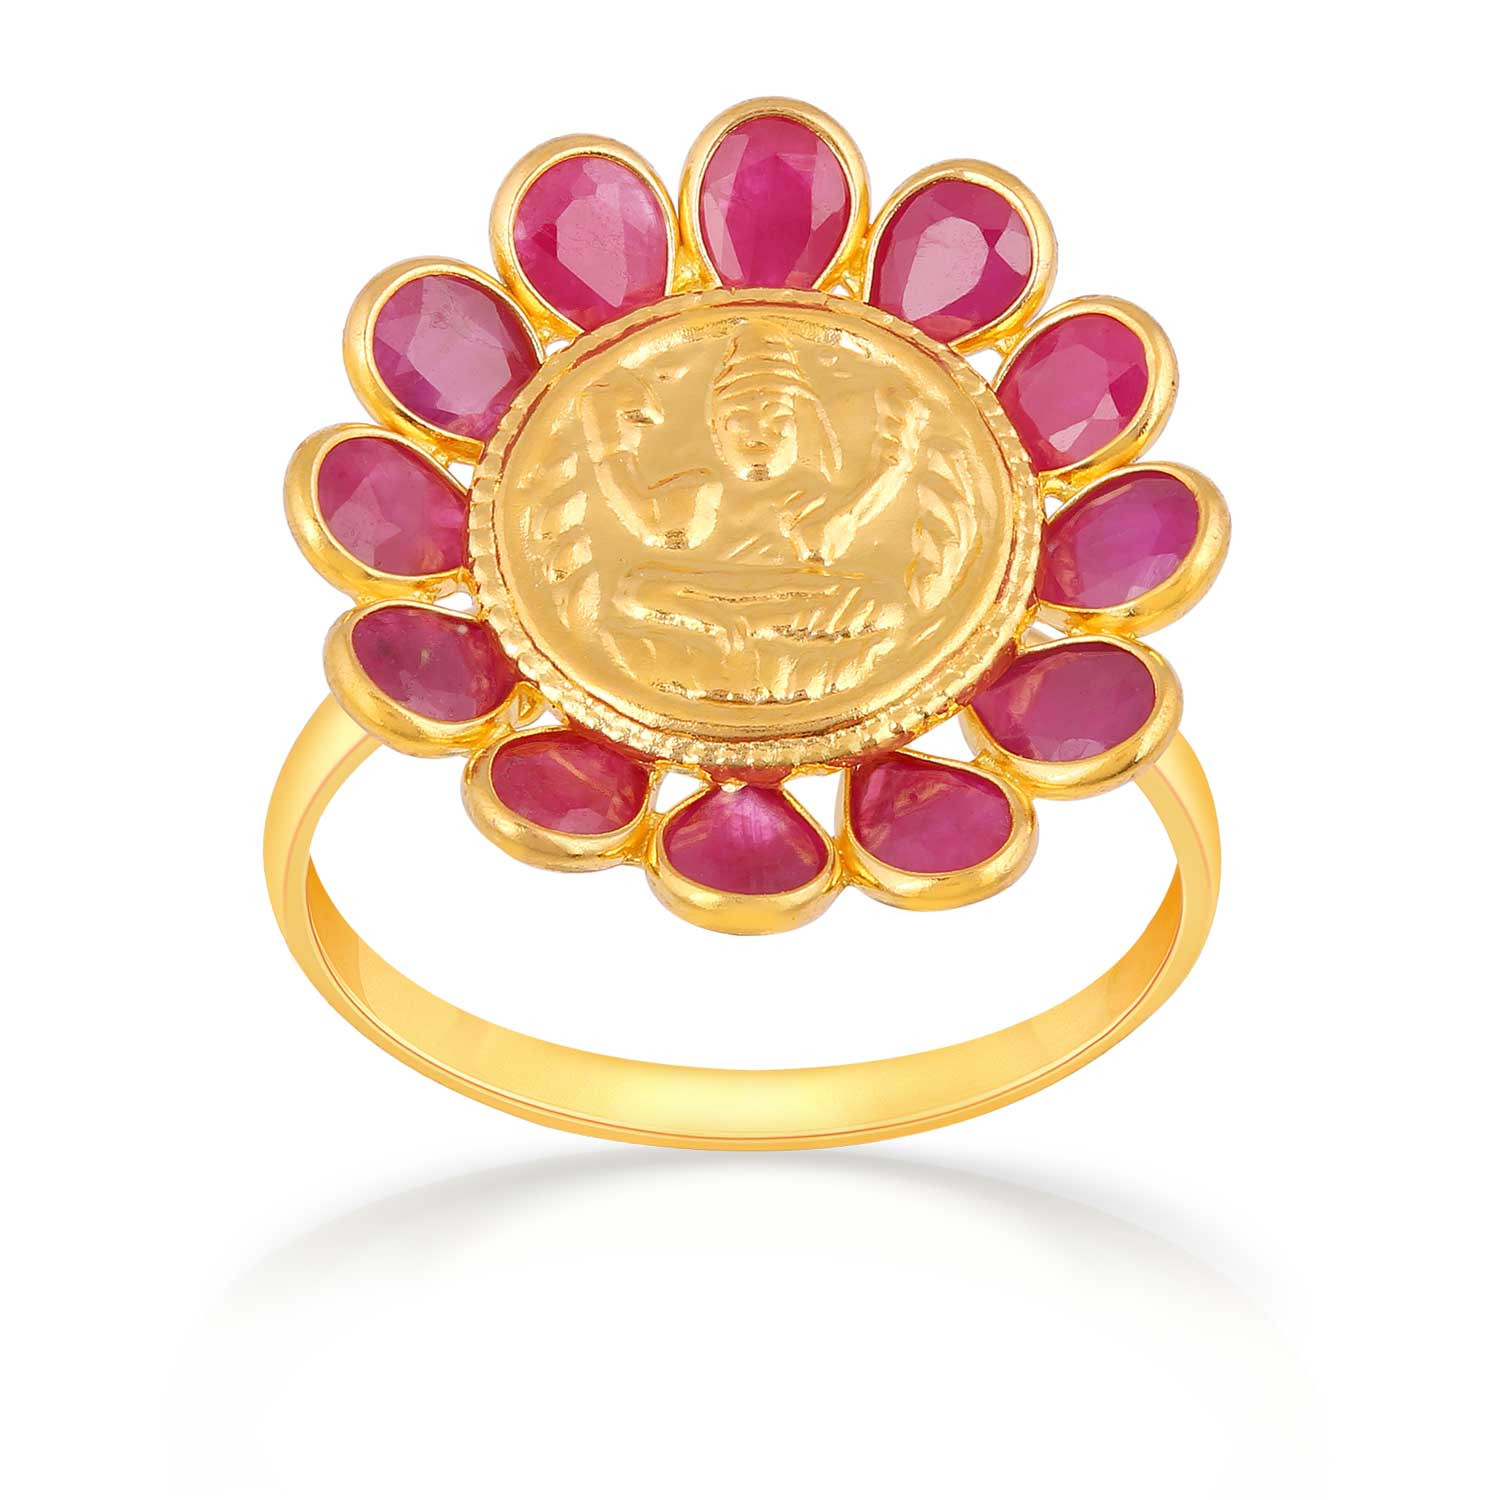 Buy Natural Polki & Red Ruby Gemstone Ring Flower Ring Statement Ring  Engagement Ring Vintage Ring Anniversary Gifts Wedding Ring Online in India  - Etsy